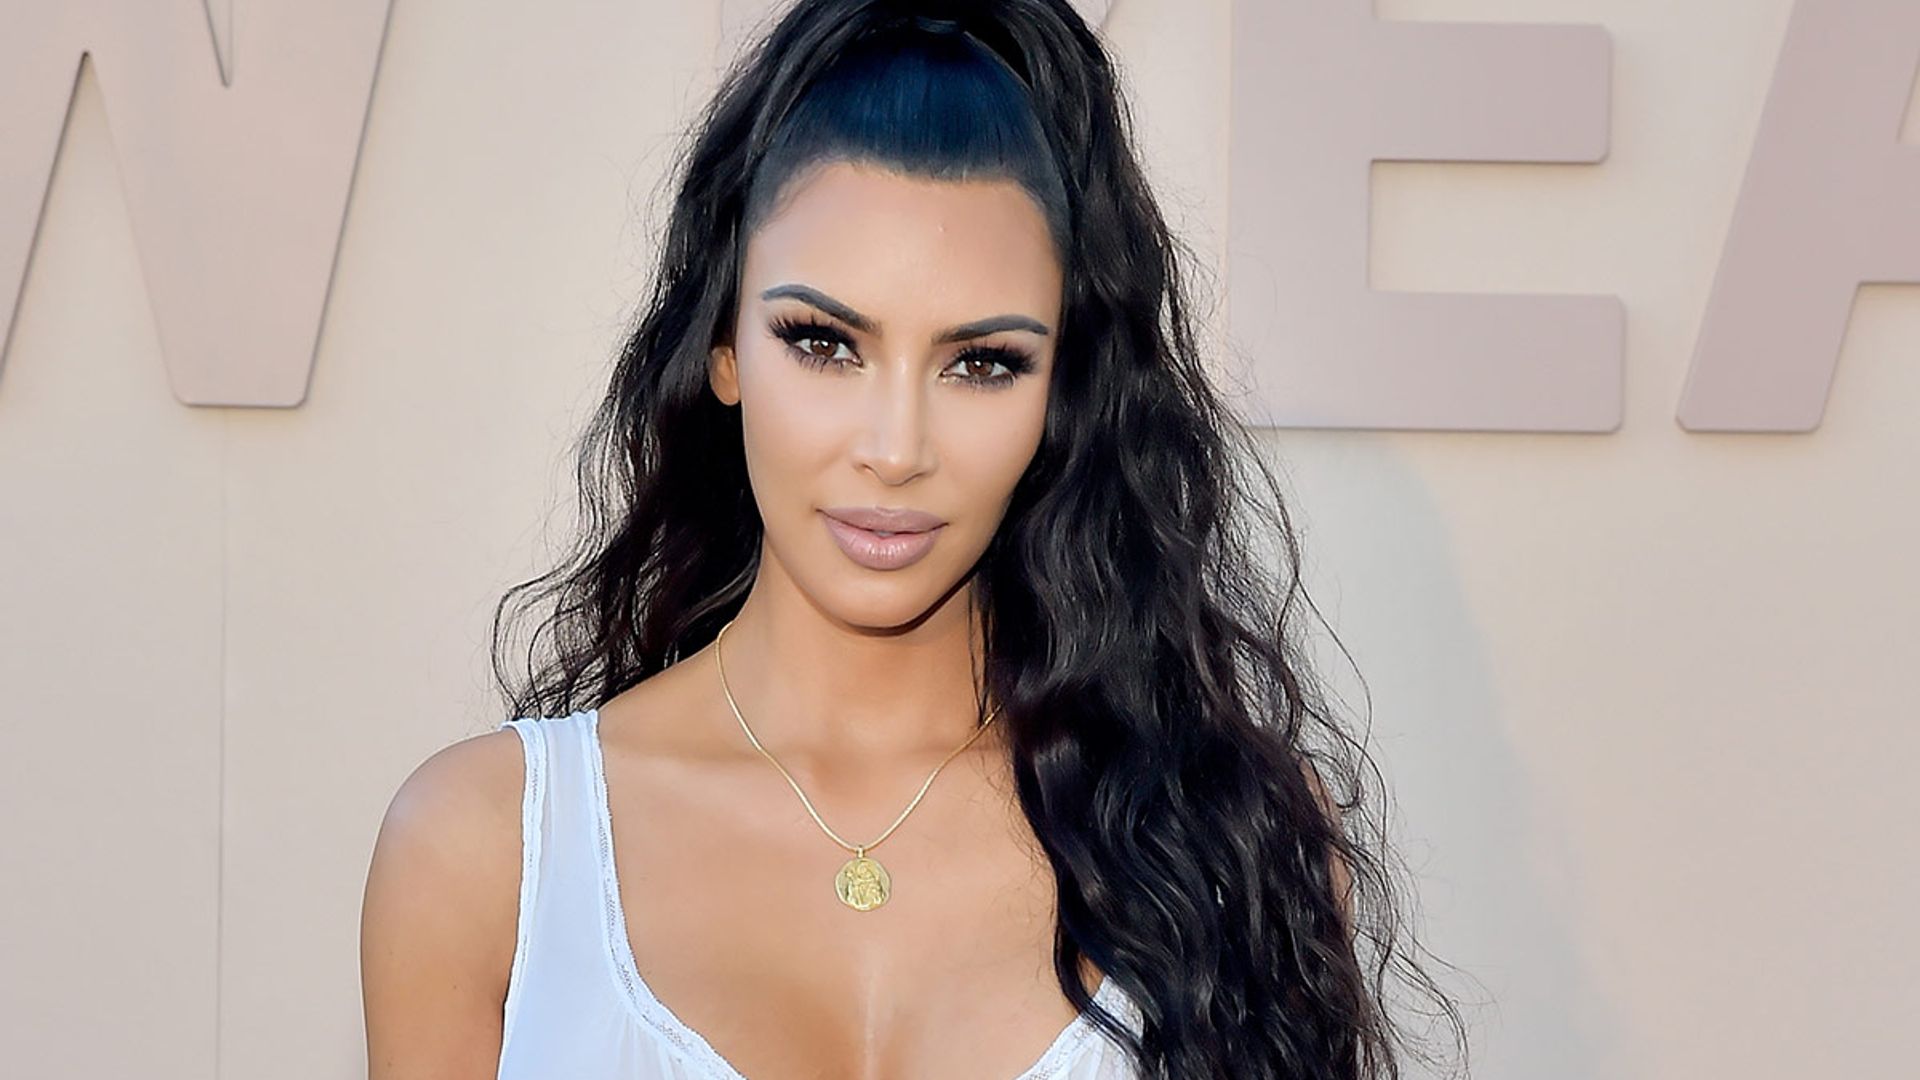 Kim Kardashian launches NEW Skims bodysuits and they're going to be a hit